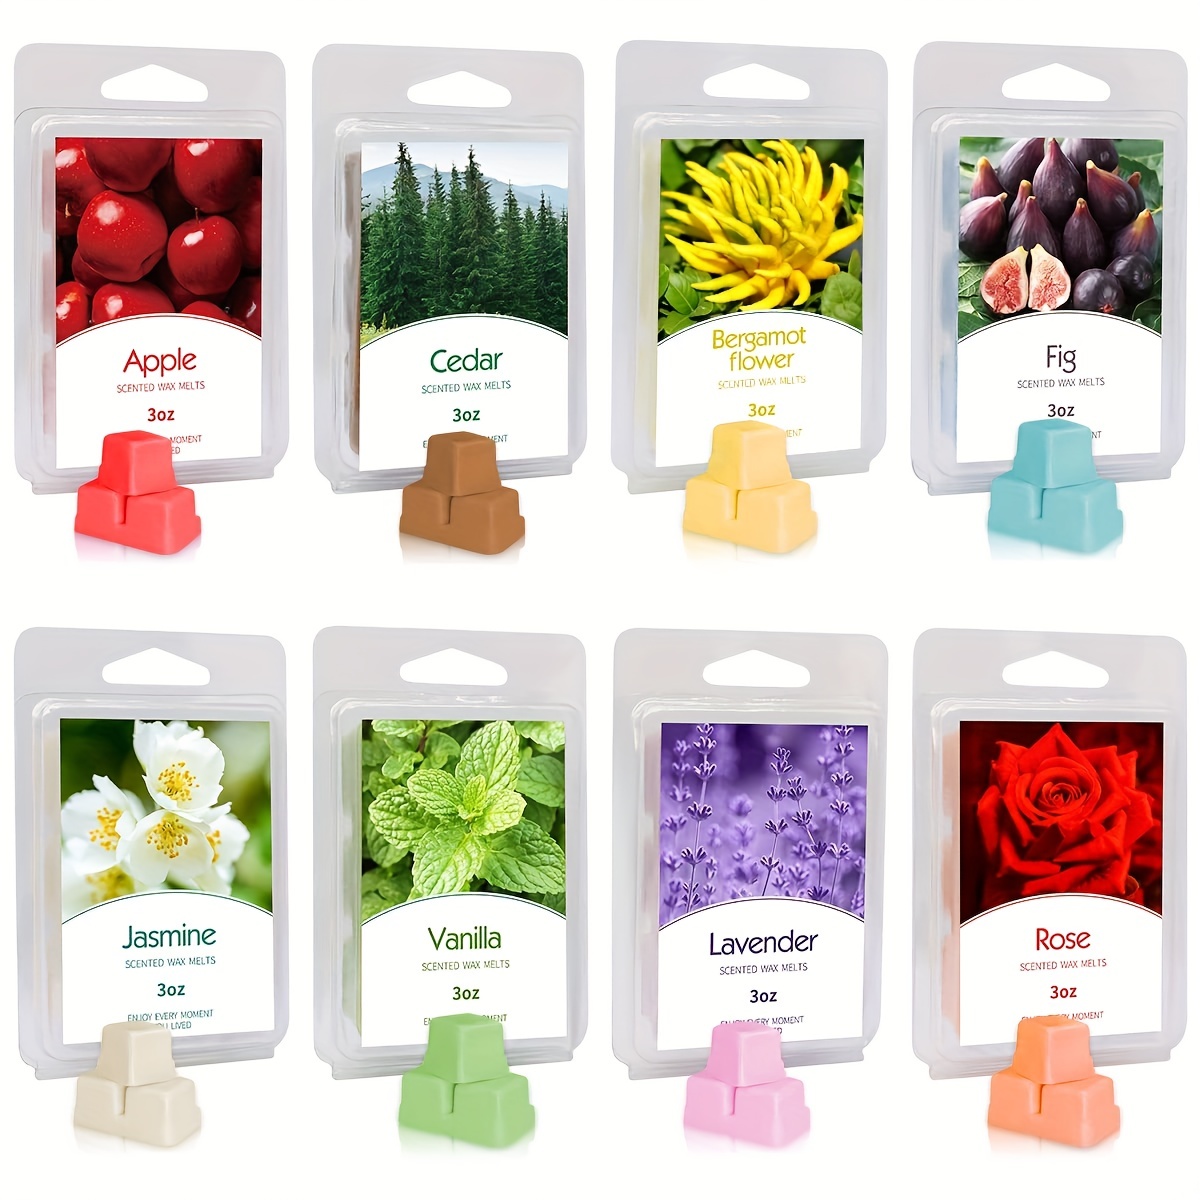  LA BELLEFÉE Wax Melts Wax Cubes, Natural Soy Wax Cubes Candle  Melts, Scented Wax Melts for Wax Warmer Mothers Day Gifts Decor, Floral of  Rose, Lavender, Jasmine, Cherry for Spa Relaxing